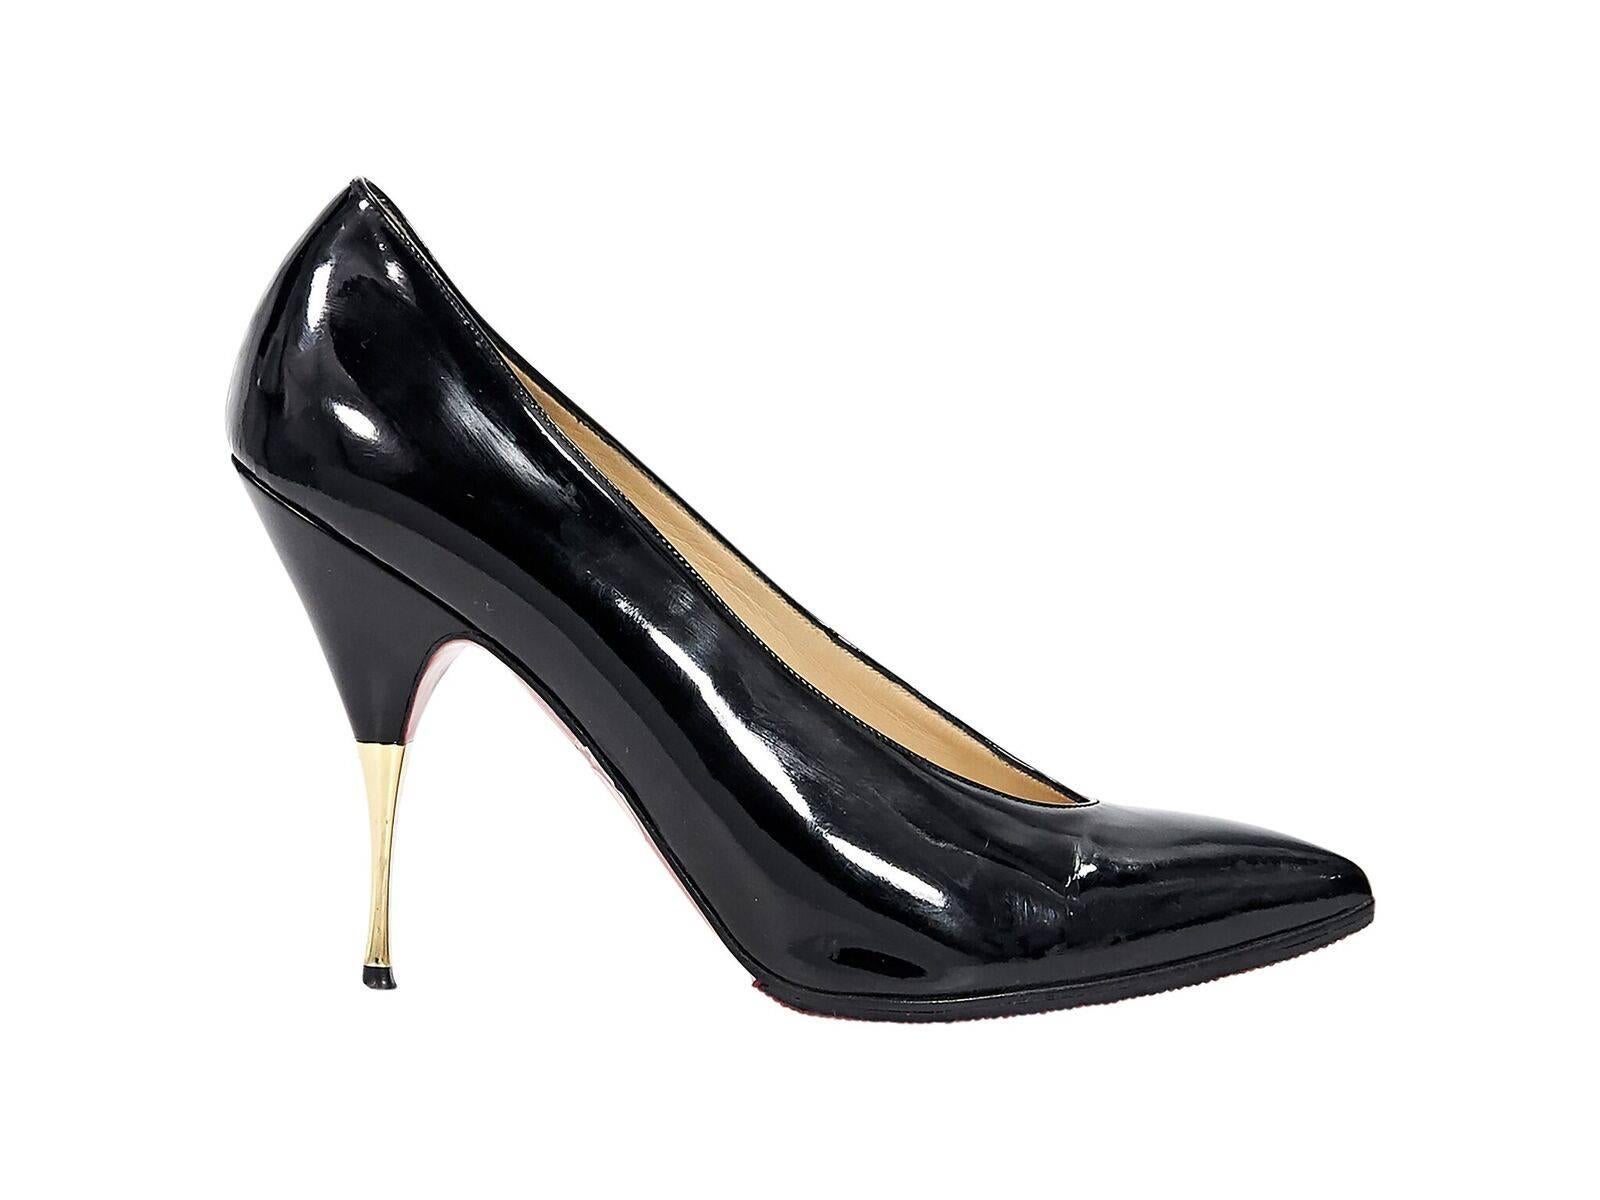 Product details:  Black patent leather pumps by Christian Louboutin.  Point toe.  Goldtone accented heel.  Iconic red sole.  Slip-on style. 
Condition: Pre-owned. Very good.
Est. Retail $1,795